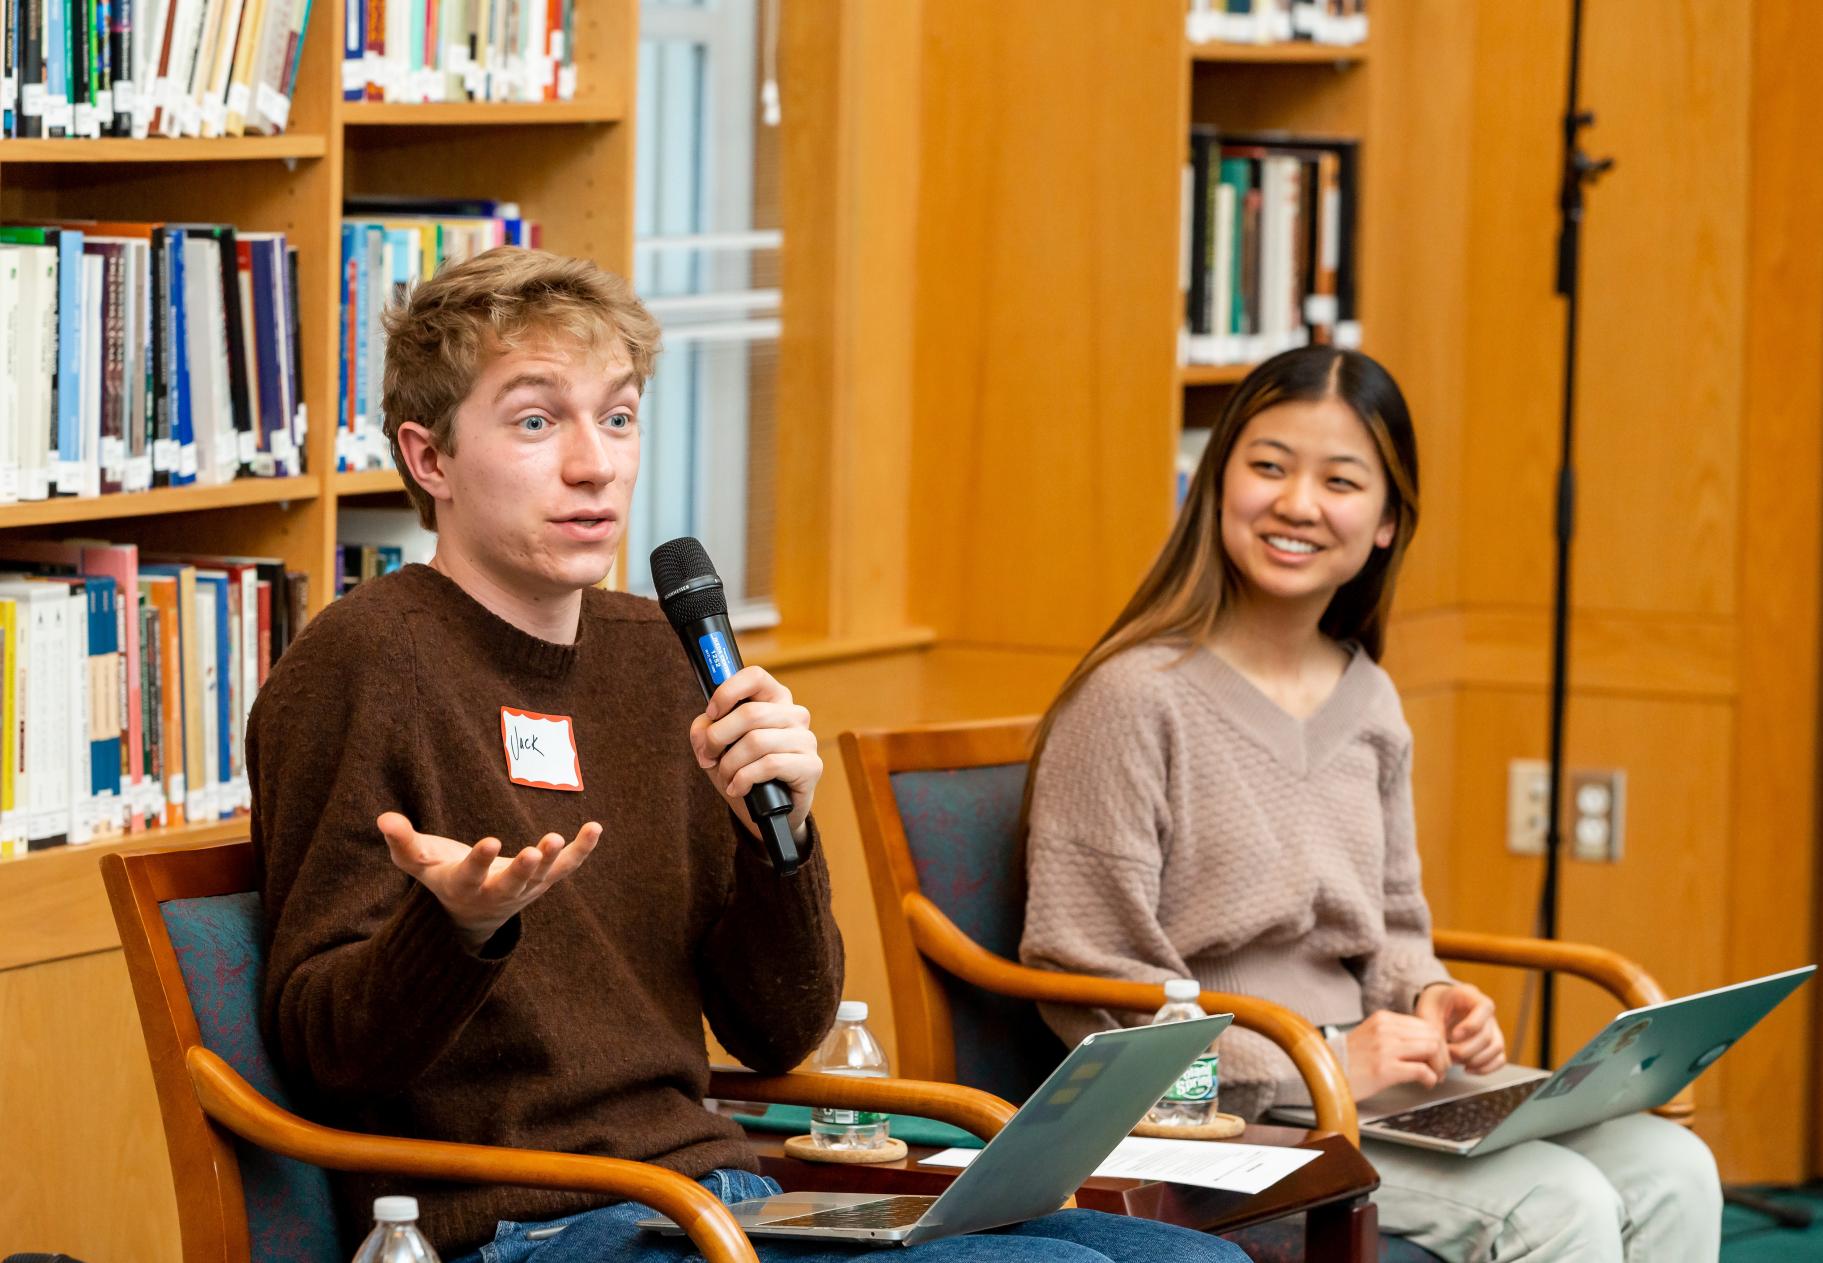 Jack Trapanick and Emma Lu share their reflections at the 2023 Voices of Hope Event